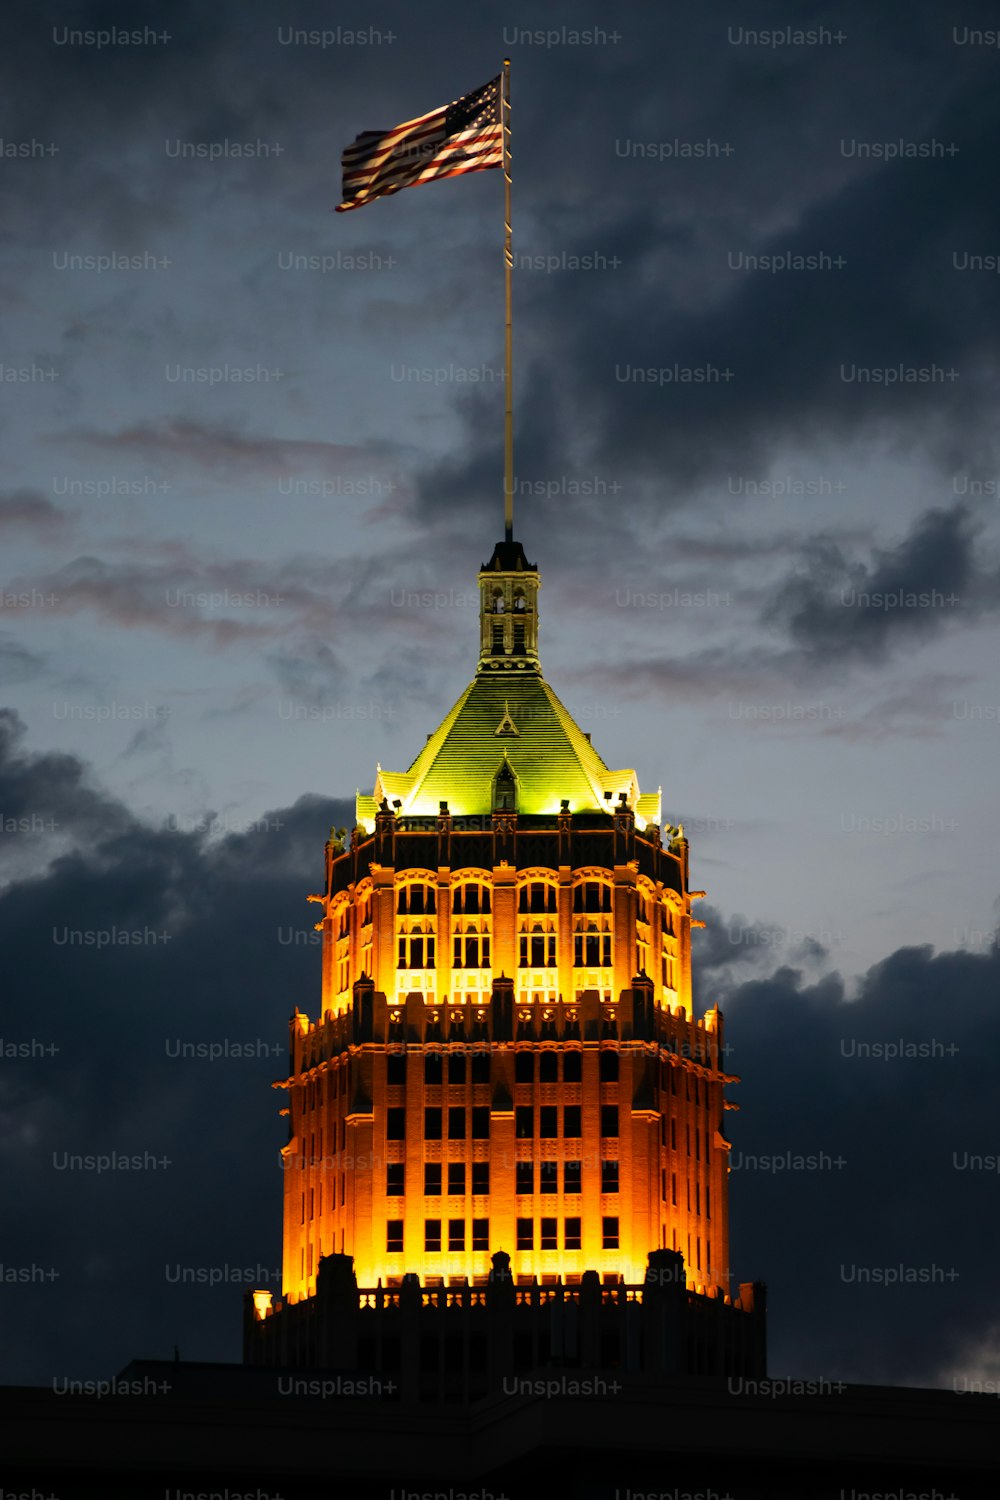 The Tower Life Building in San Antonio Texas at night